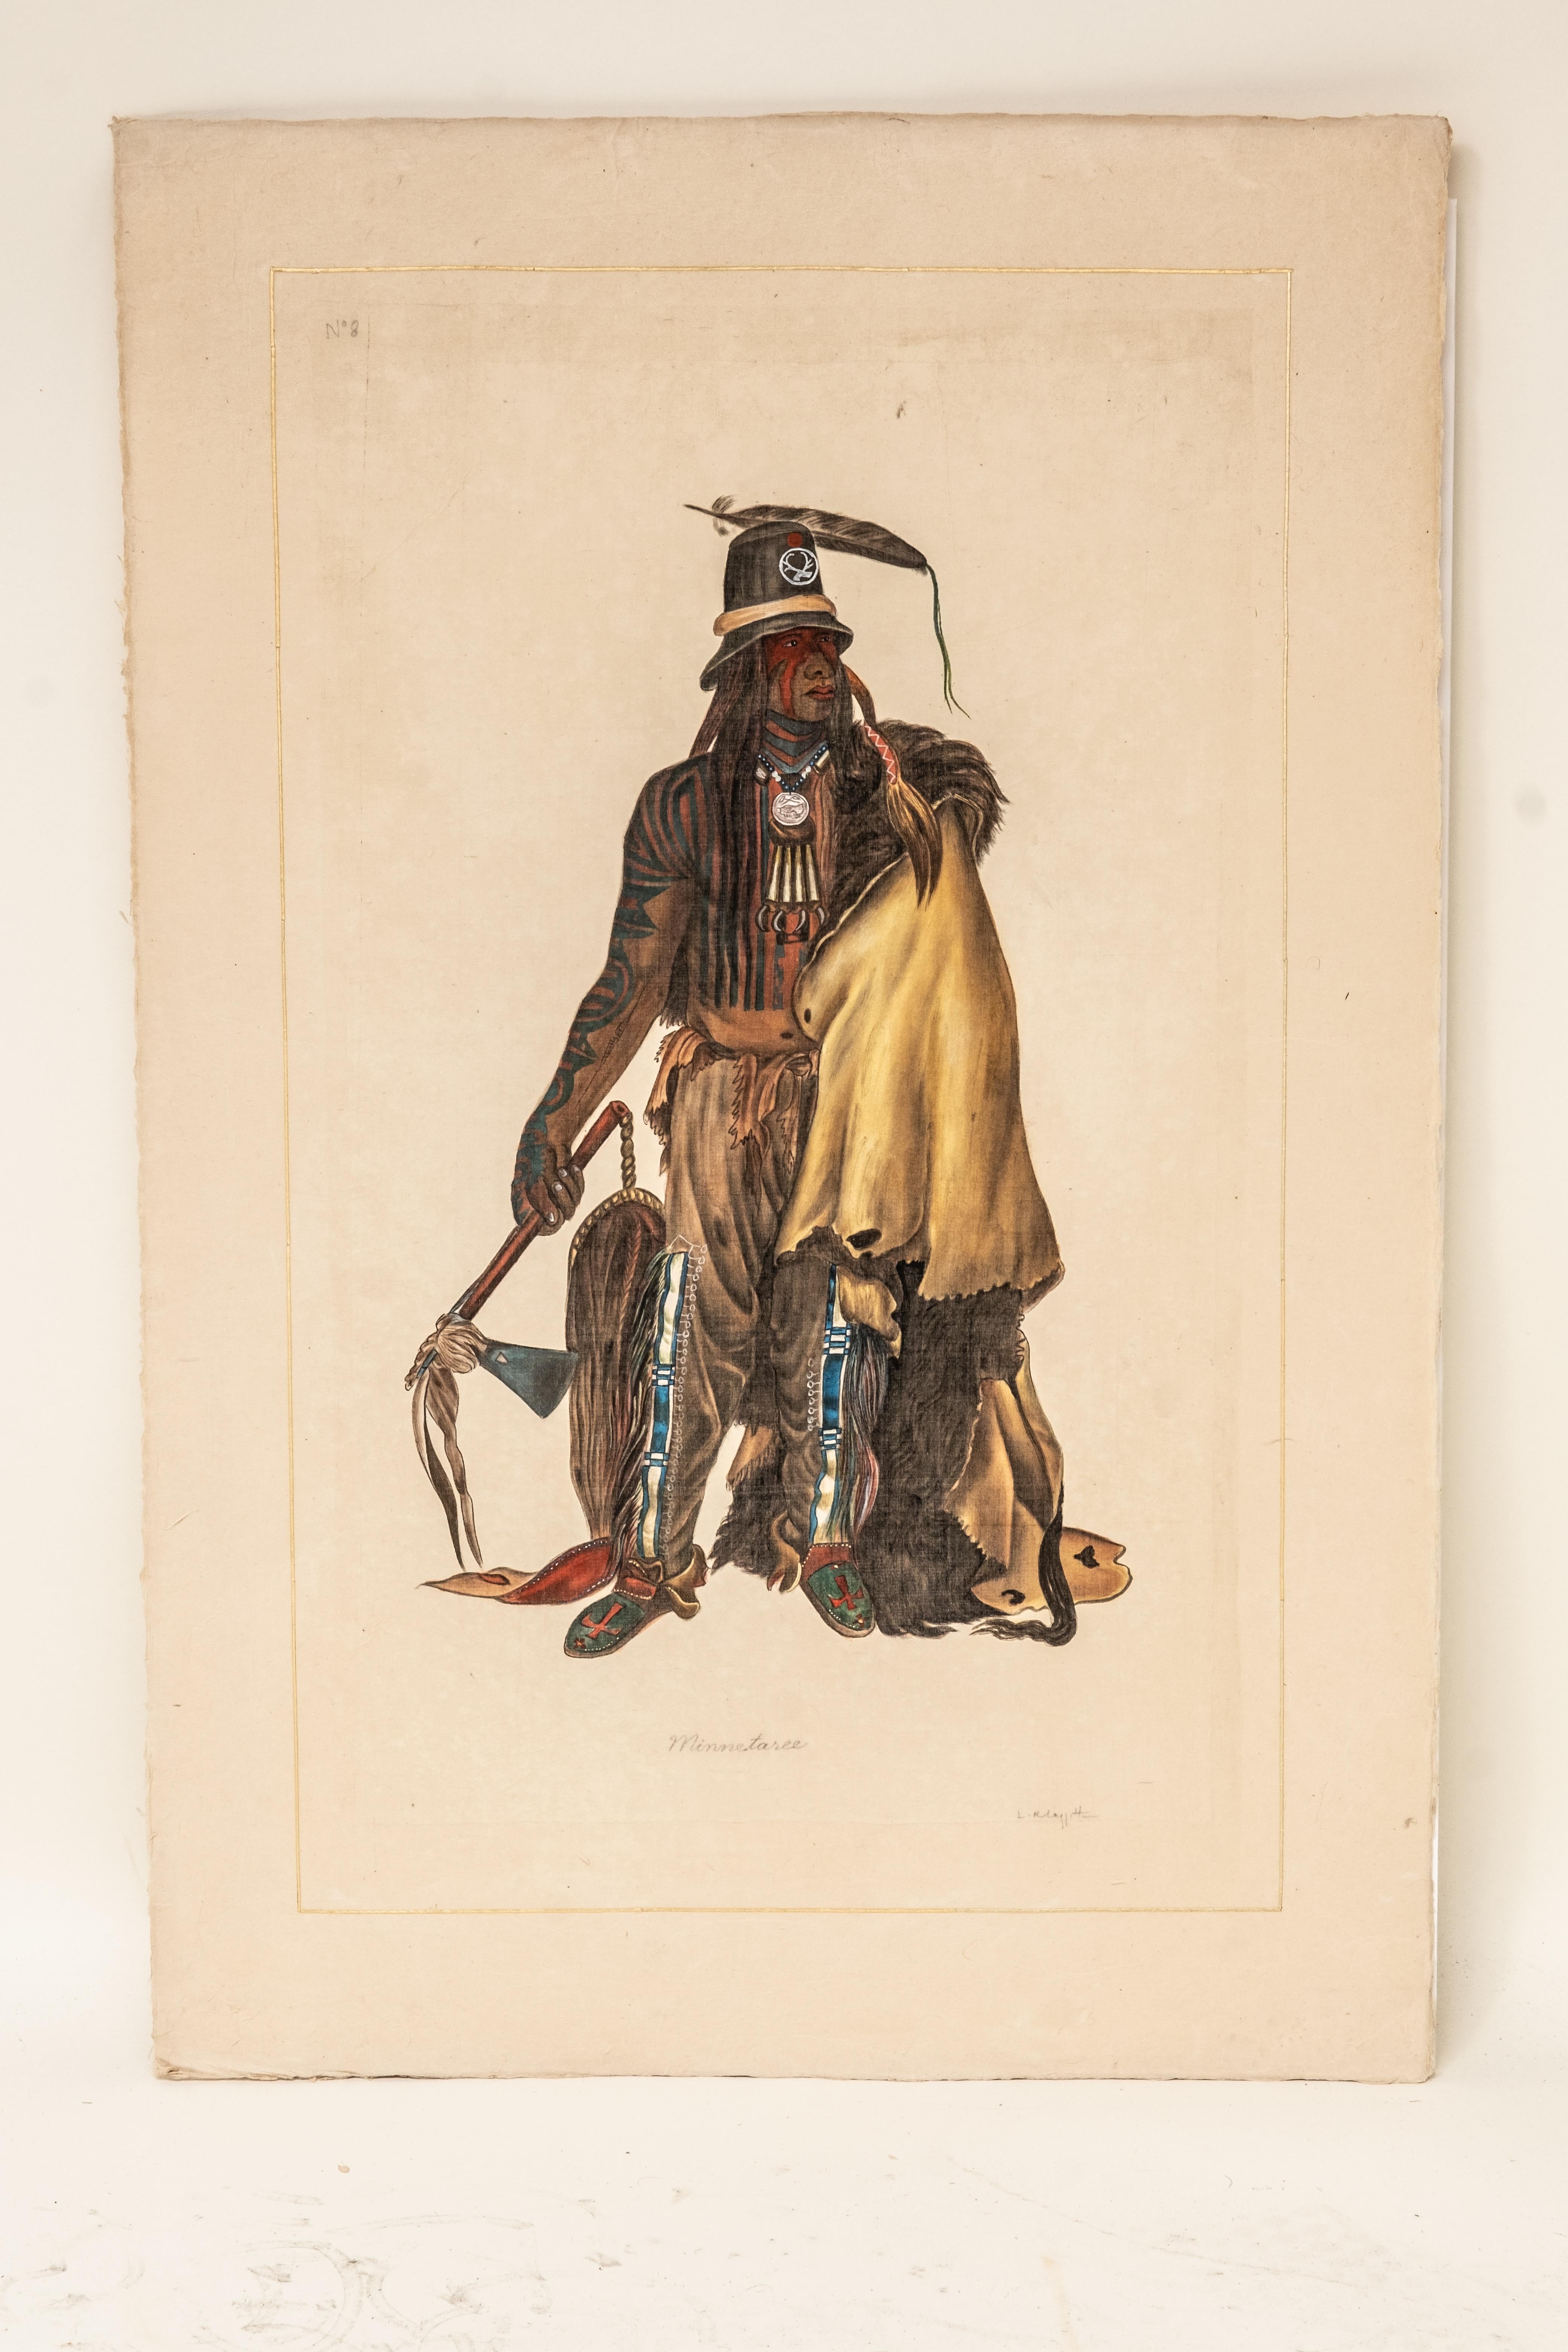 Signed L.R Laffitte Watercolor of a Cree Native American on silk mounted on laid paper, Signed in pencil at the bottom. The Cree are indigenous people originally living in Manitoba, Canada. However, one branch later moved southwest to adopt a